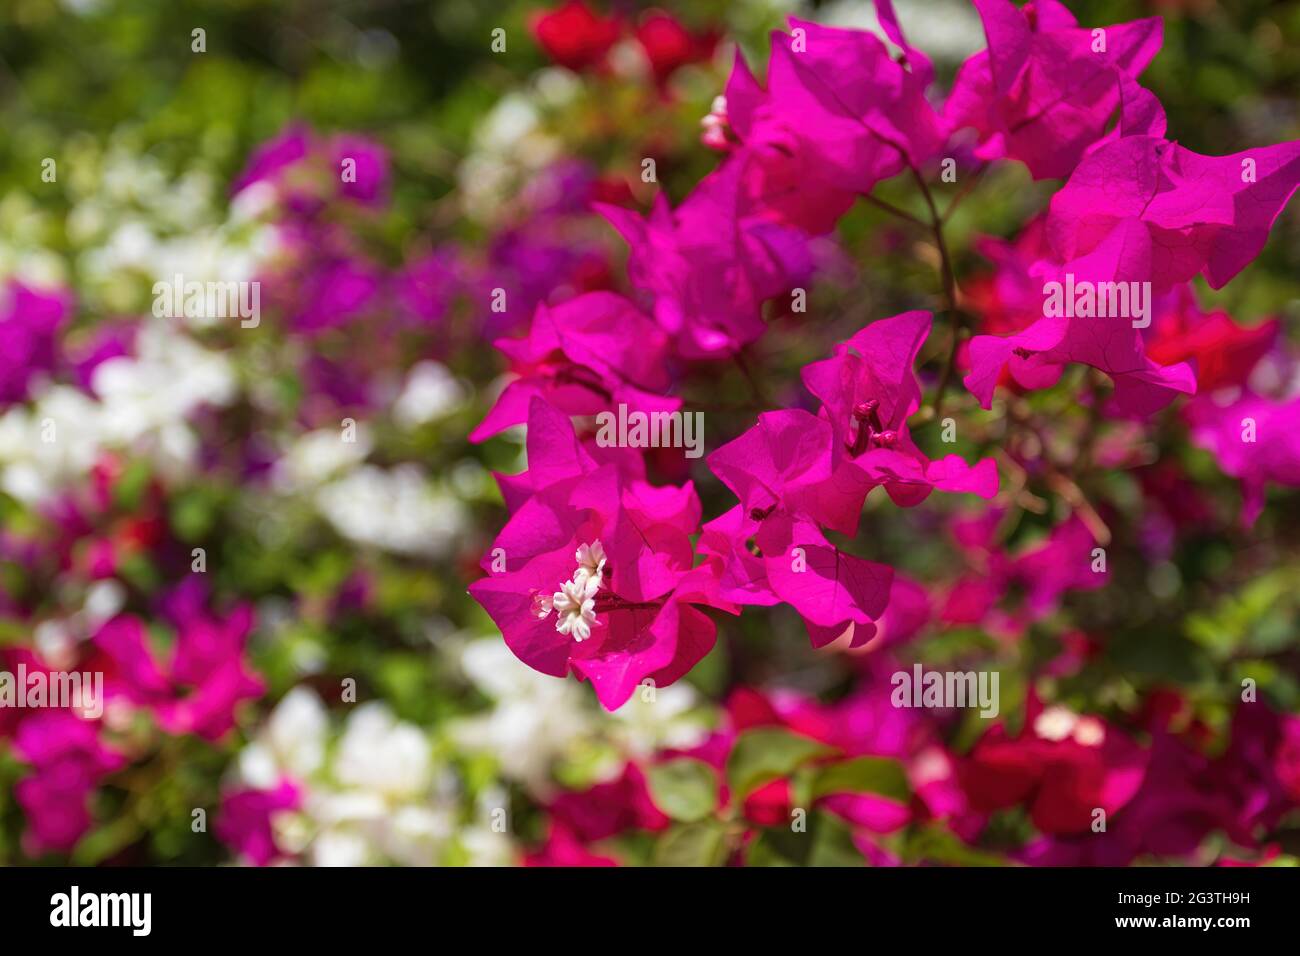 Bougainvillea flowers blooming in the garden Stock Photo